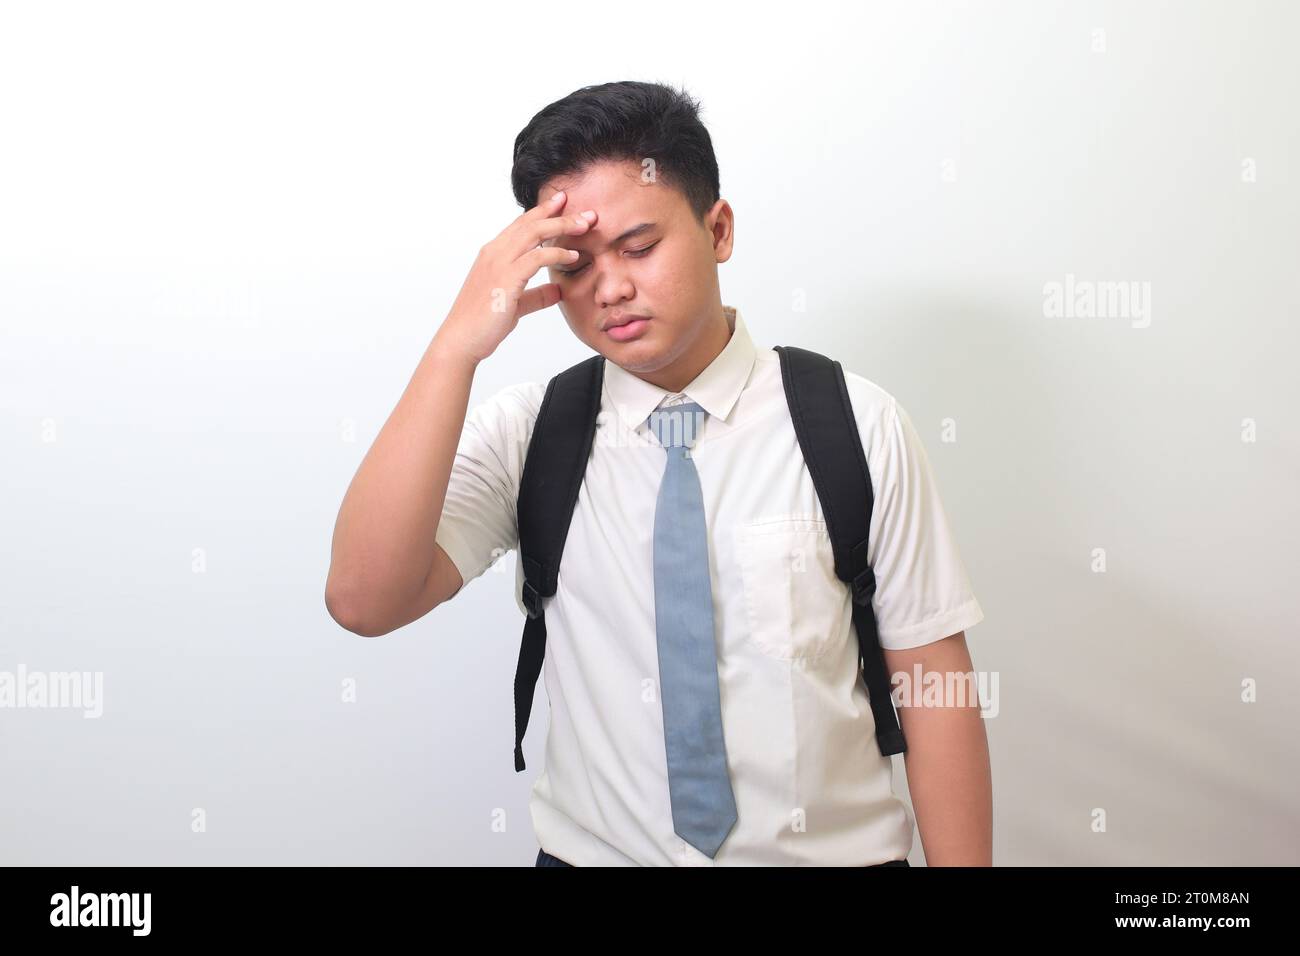 Indonesian senior high school student wearing white shirt uniform with gray tie suffering headache and holding hands on forehead. Isolated image on wh Stock Photo